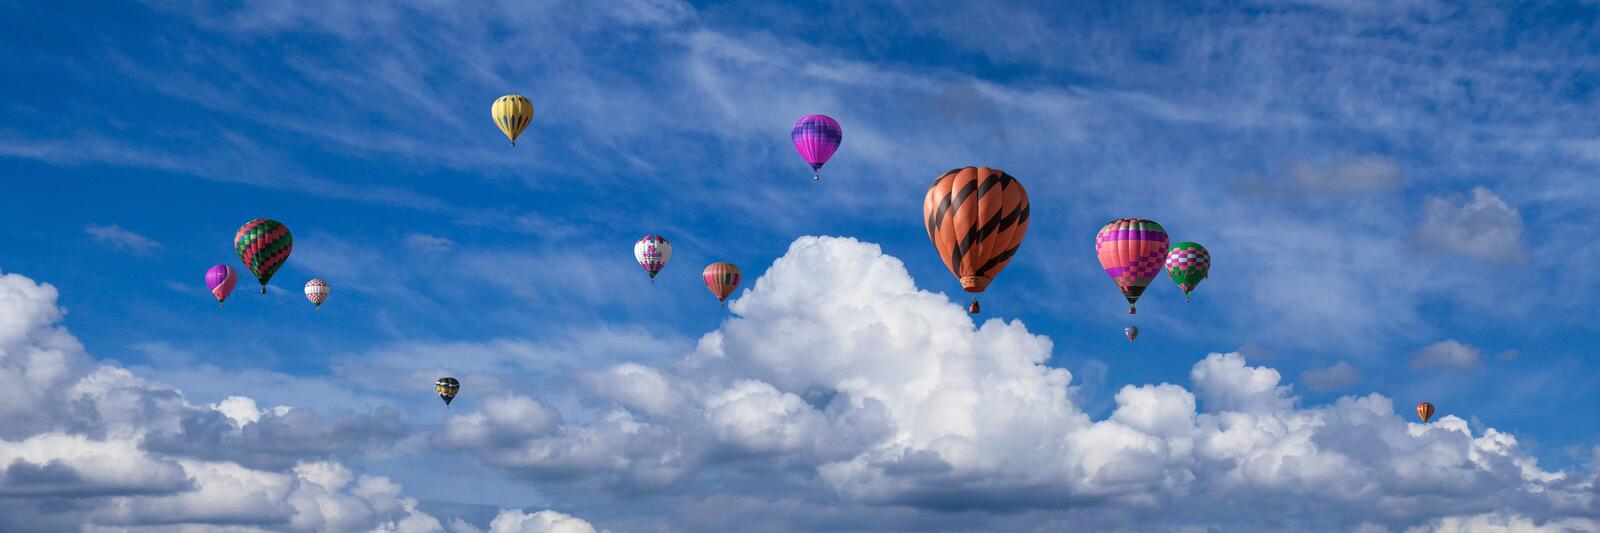 Wallpapers balloons clouds panorama on the desktop